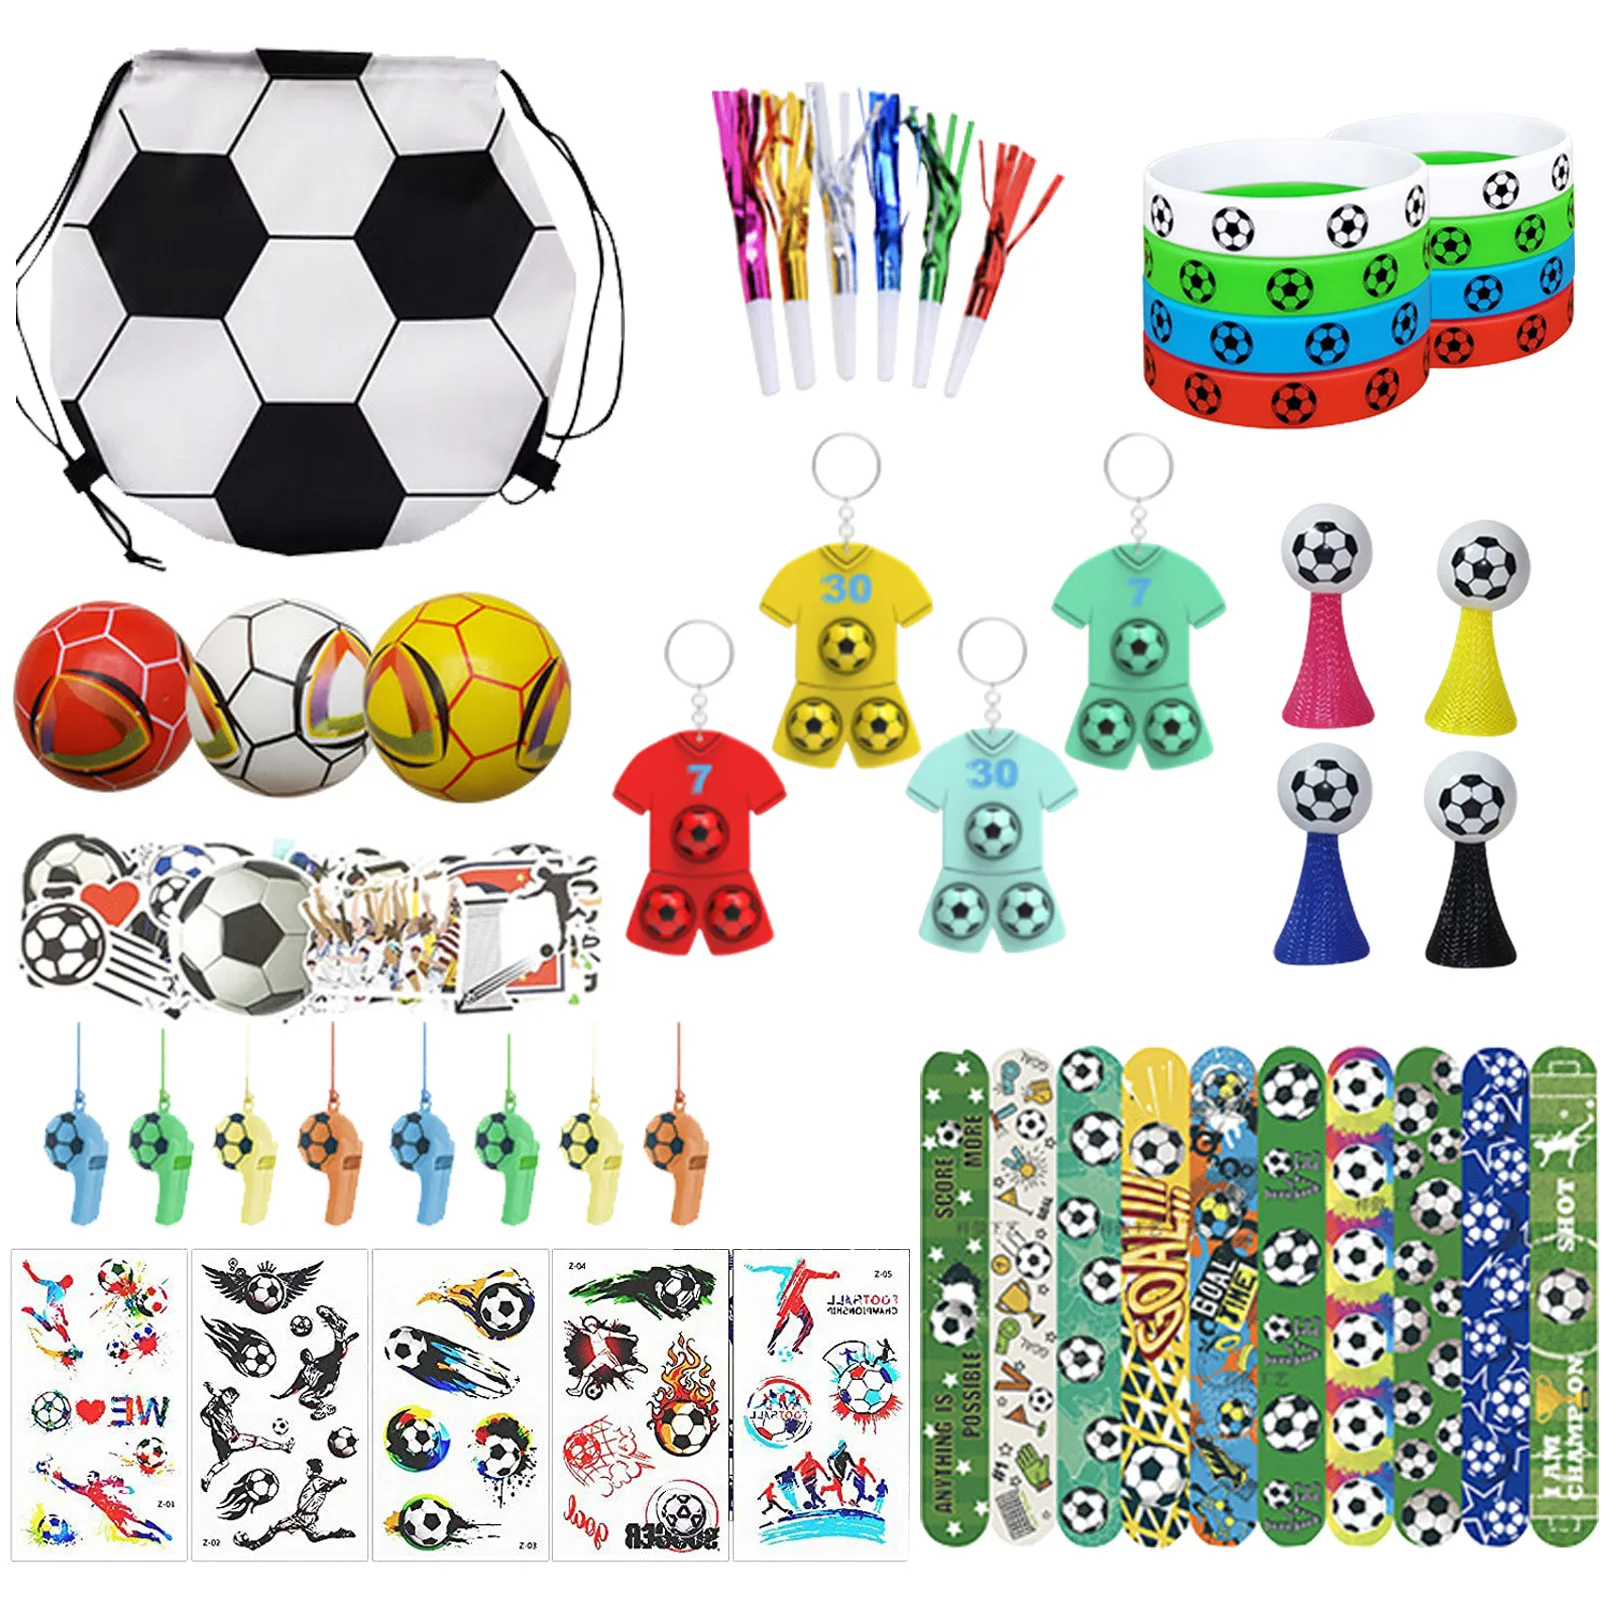 

Soccer Ball Party Favour Football Party Bags Fillers For Boys Football Theme Bracelets Whistles Bouncy Balls Keyrings Keychains